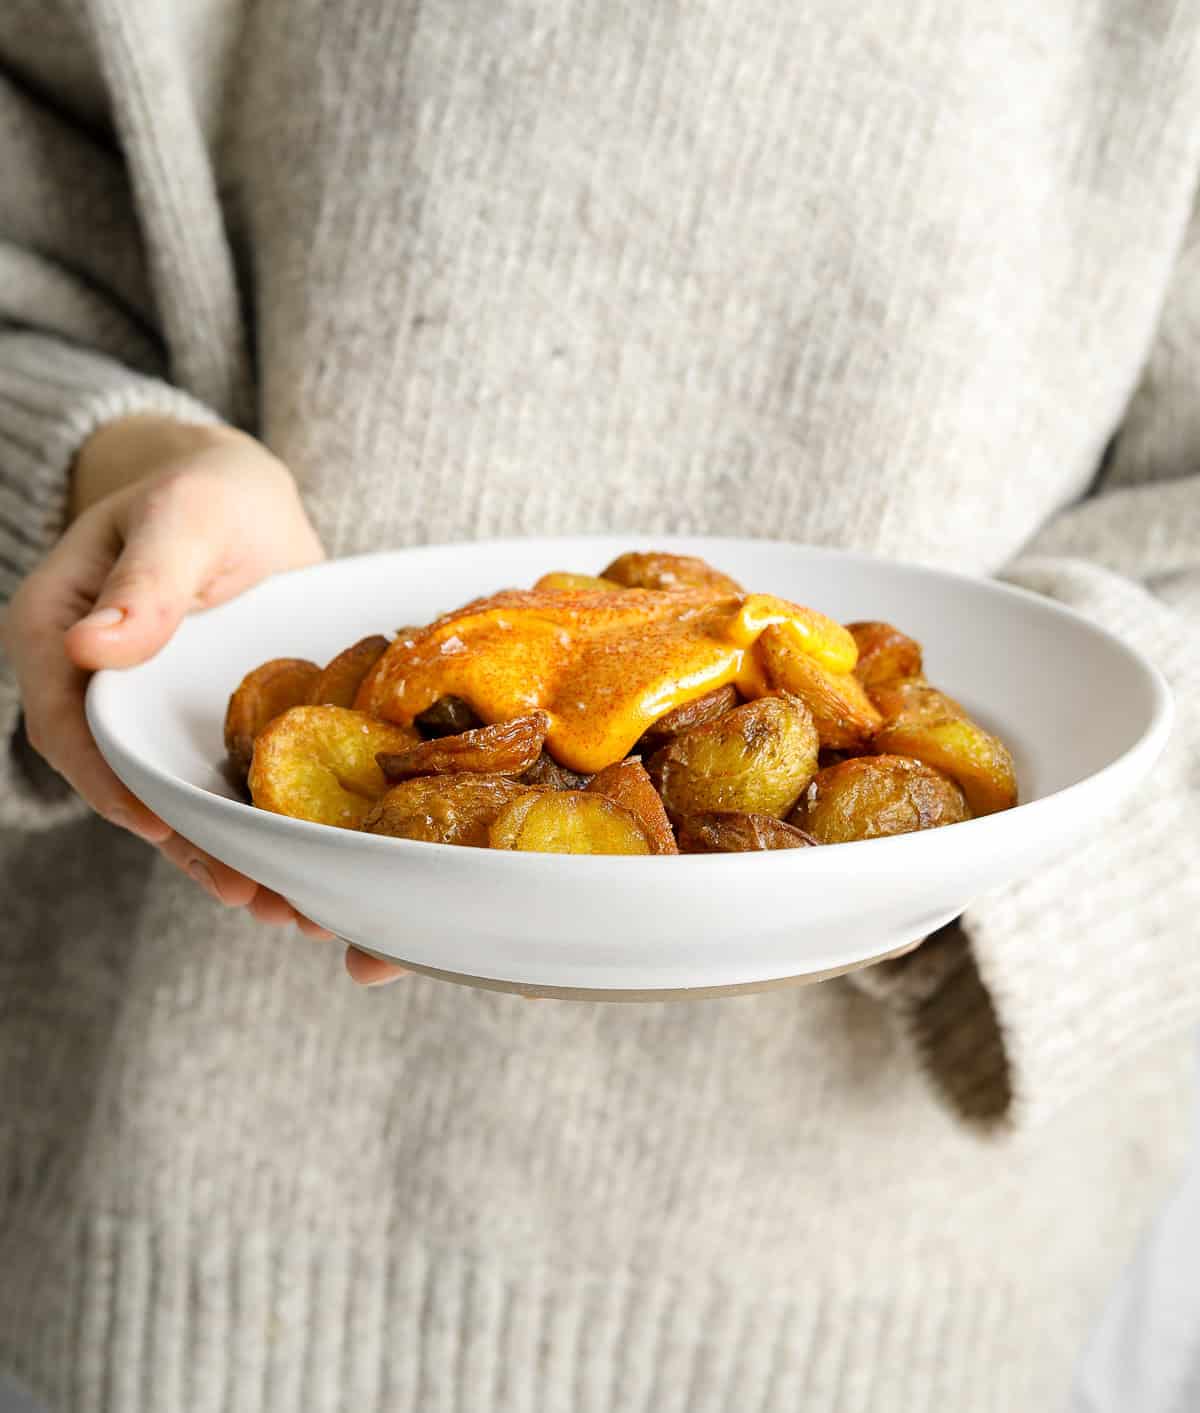 A person in a gray sweater holding a bowl of crispy roasted potatoes with a red sauce.